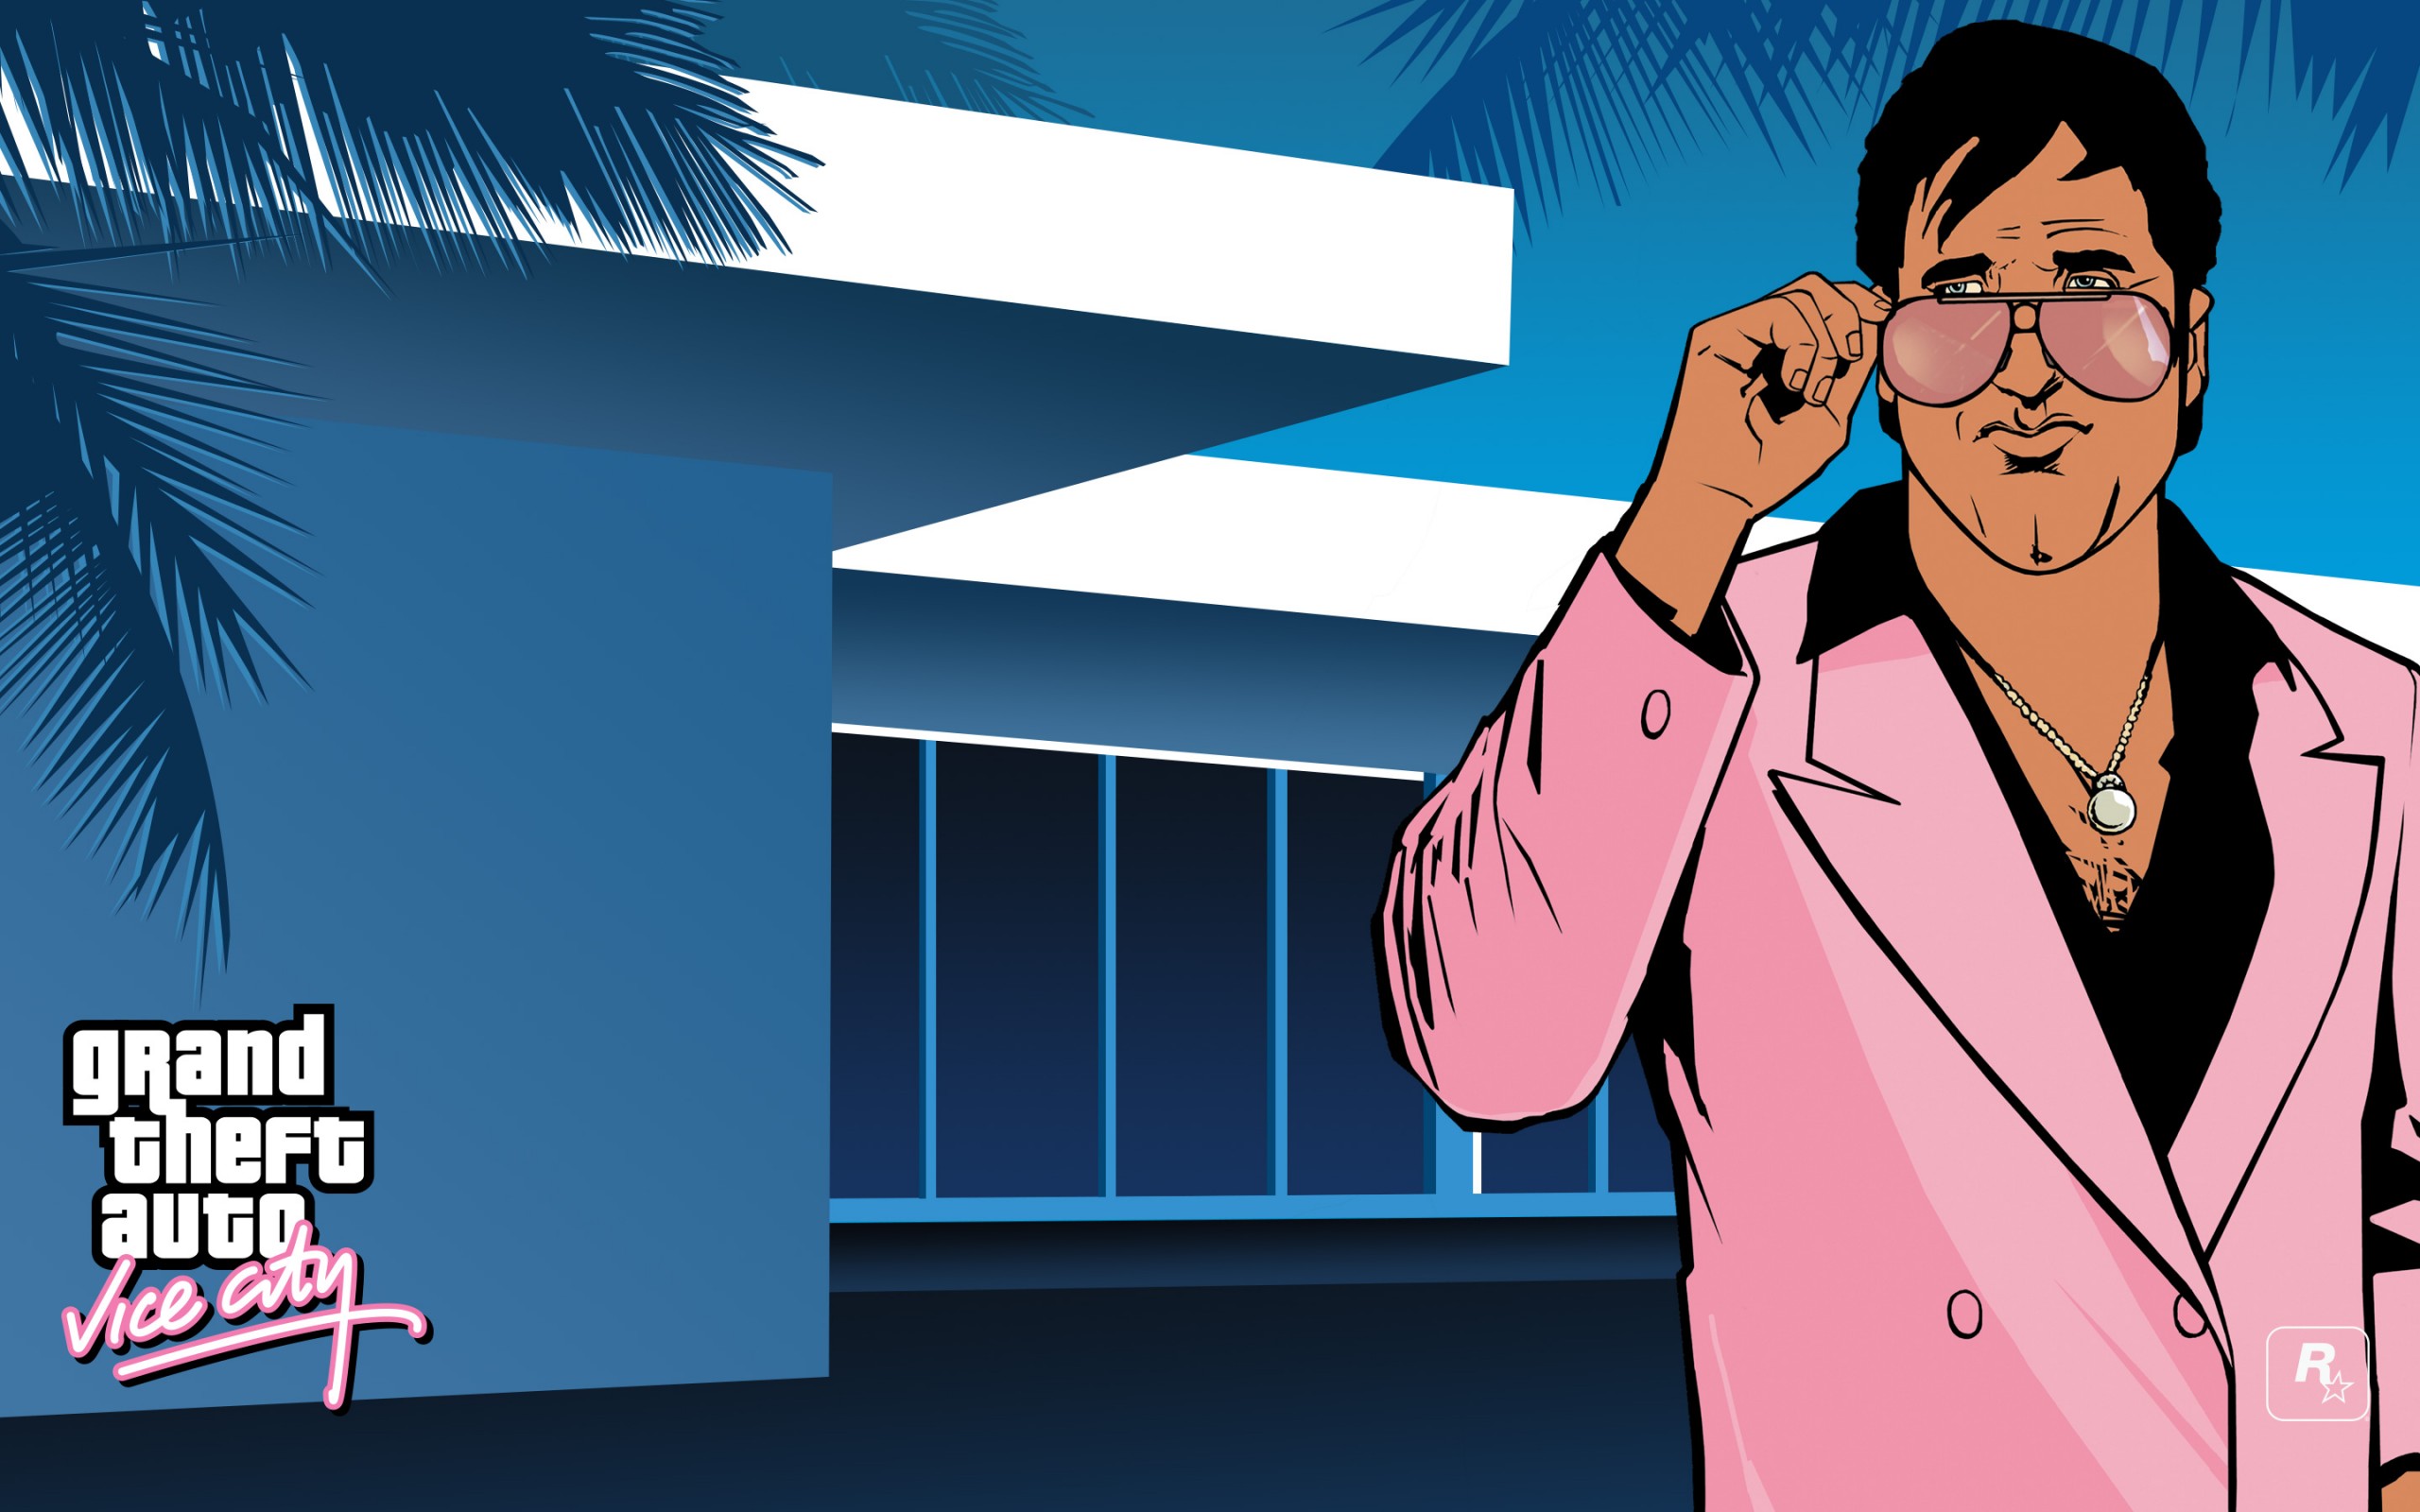 Grand Theft Auto: Vice City Wallpapers